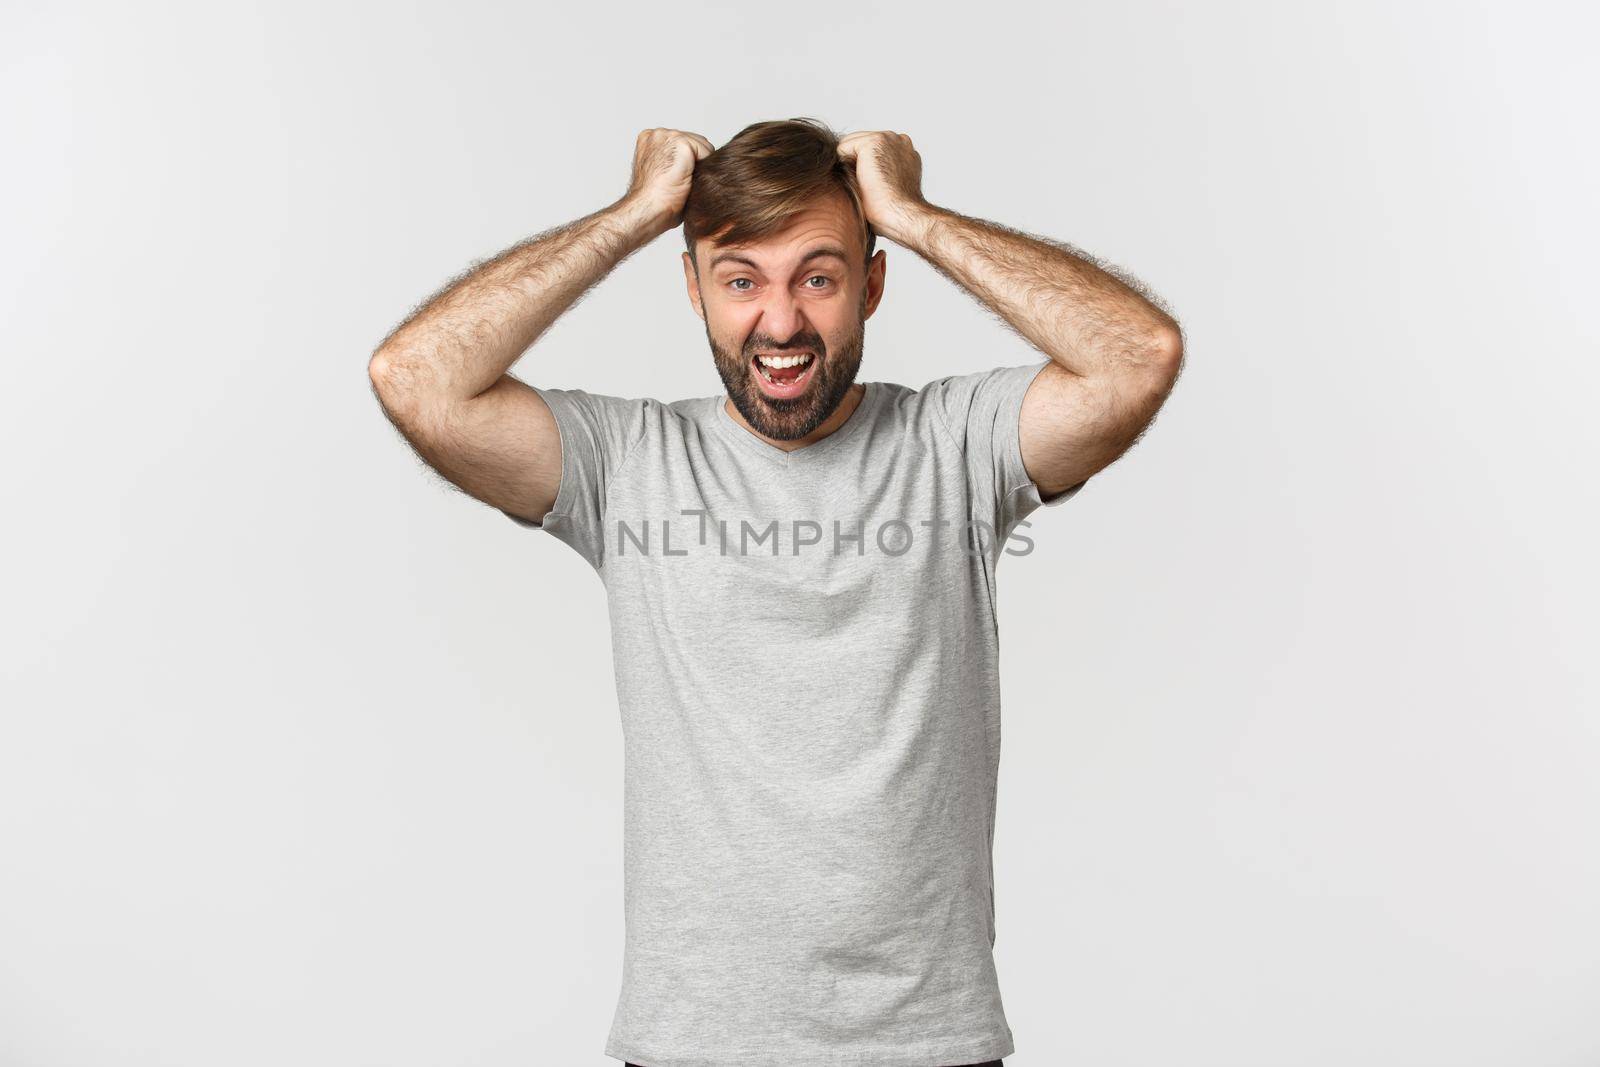 Portrait of distressed mad guy in gray t-shirt, ripping hair from anger and shouting, standing over white background.